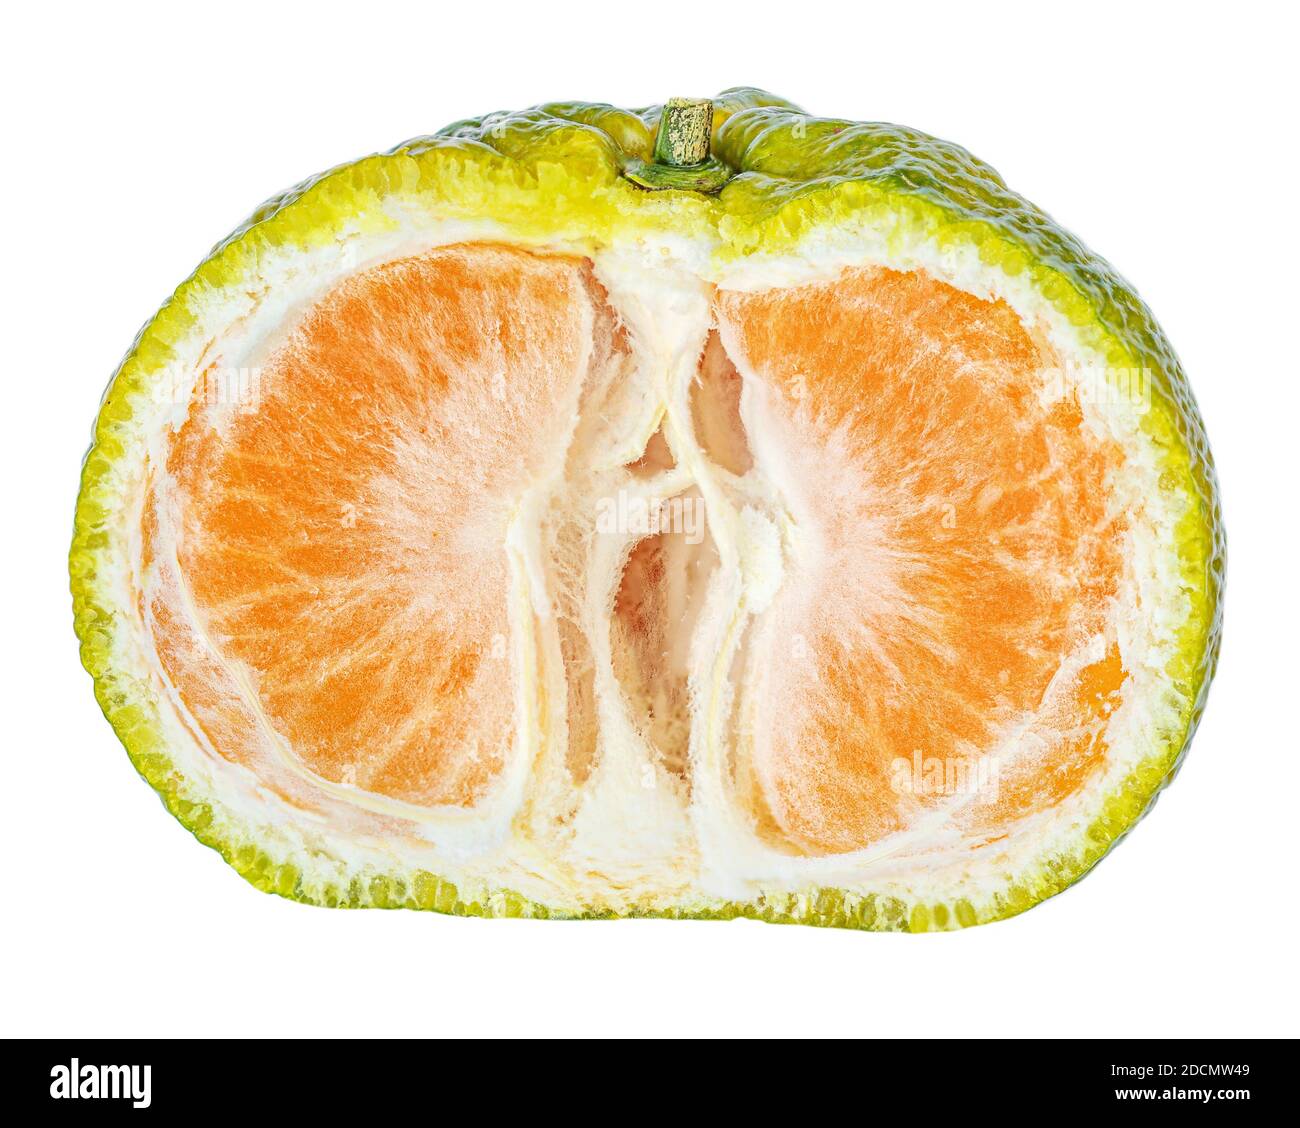 One half Tangerine or clementine fruit  slice with citrus peel  isolated on white background Stock Photo